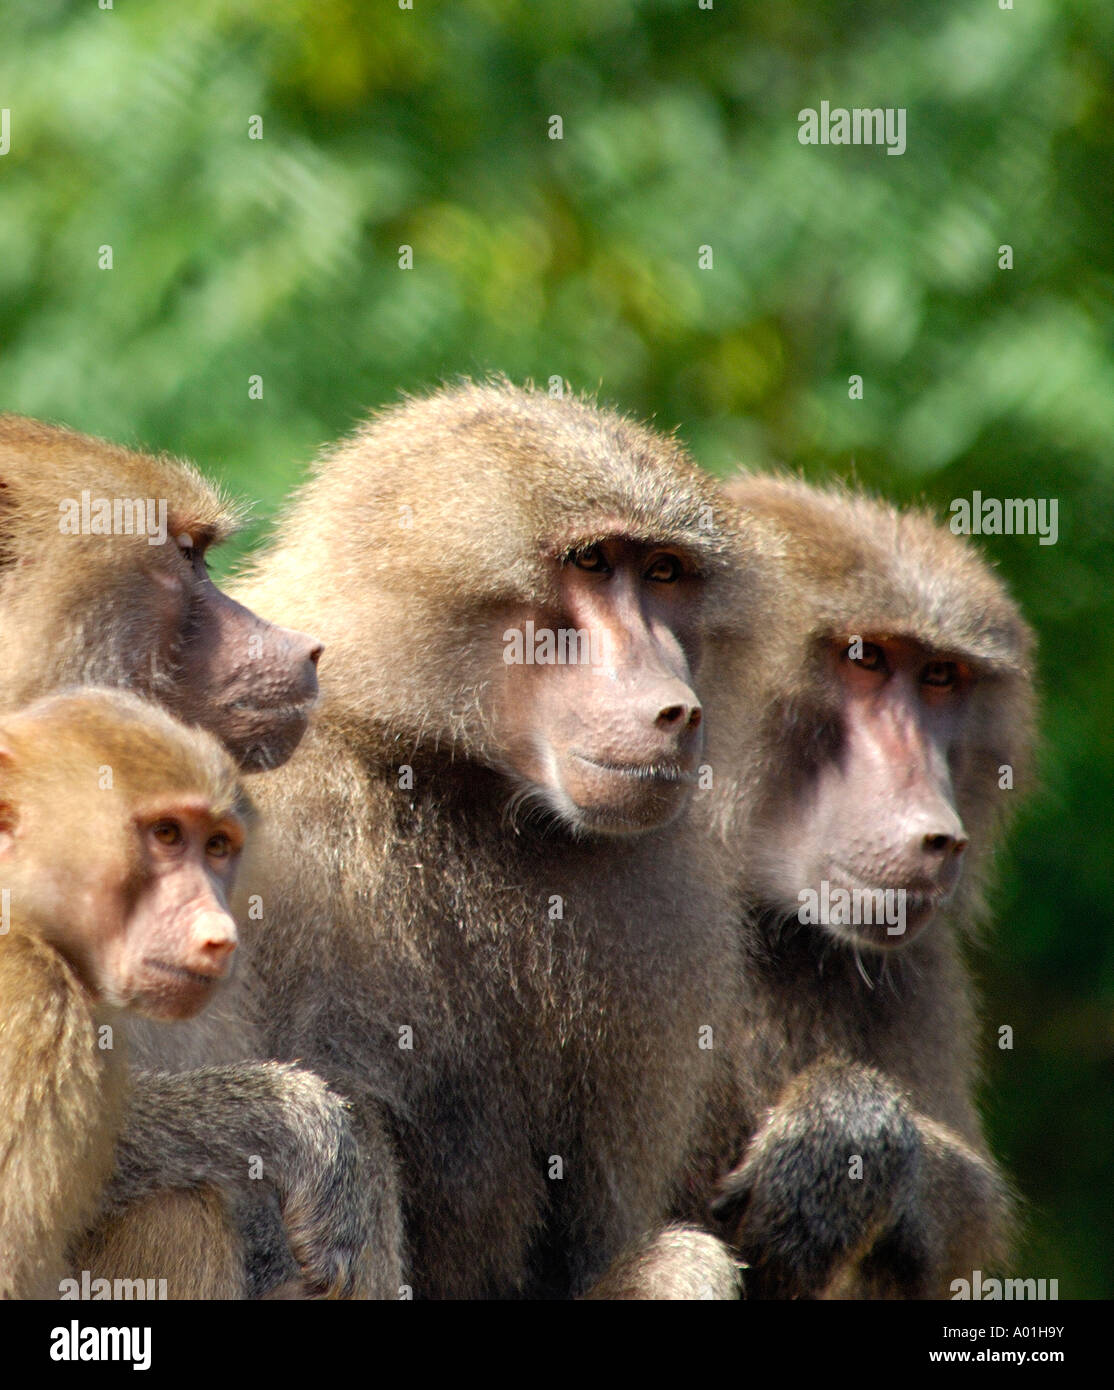 Intimate close up portrait of a group of Hamadryas Baboons Papio hamadryas with nicely blurred background of trees Stock Photo